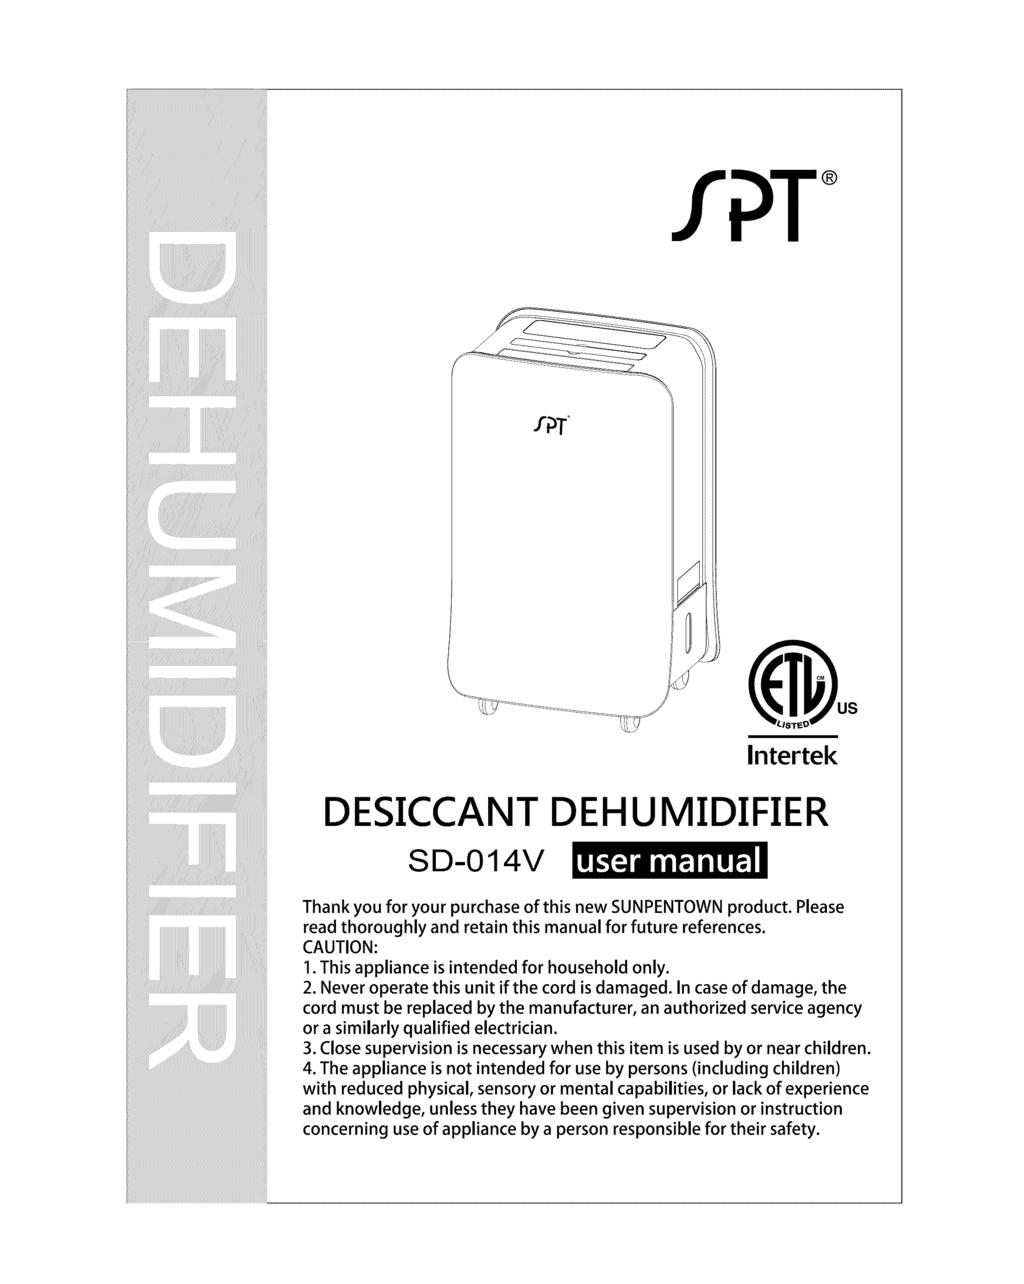 Intertek DESICCANT SD-O14V DEHUMIDIFIER Thank you for your purchase of this new SUNPENTOWN product. read thoroughly and retain this manual for future references. CAUTION: Please 1.